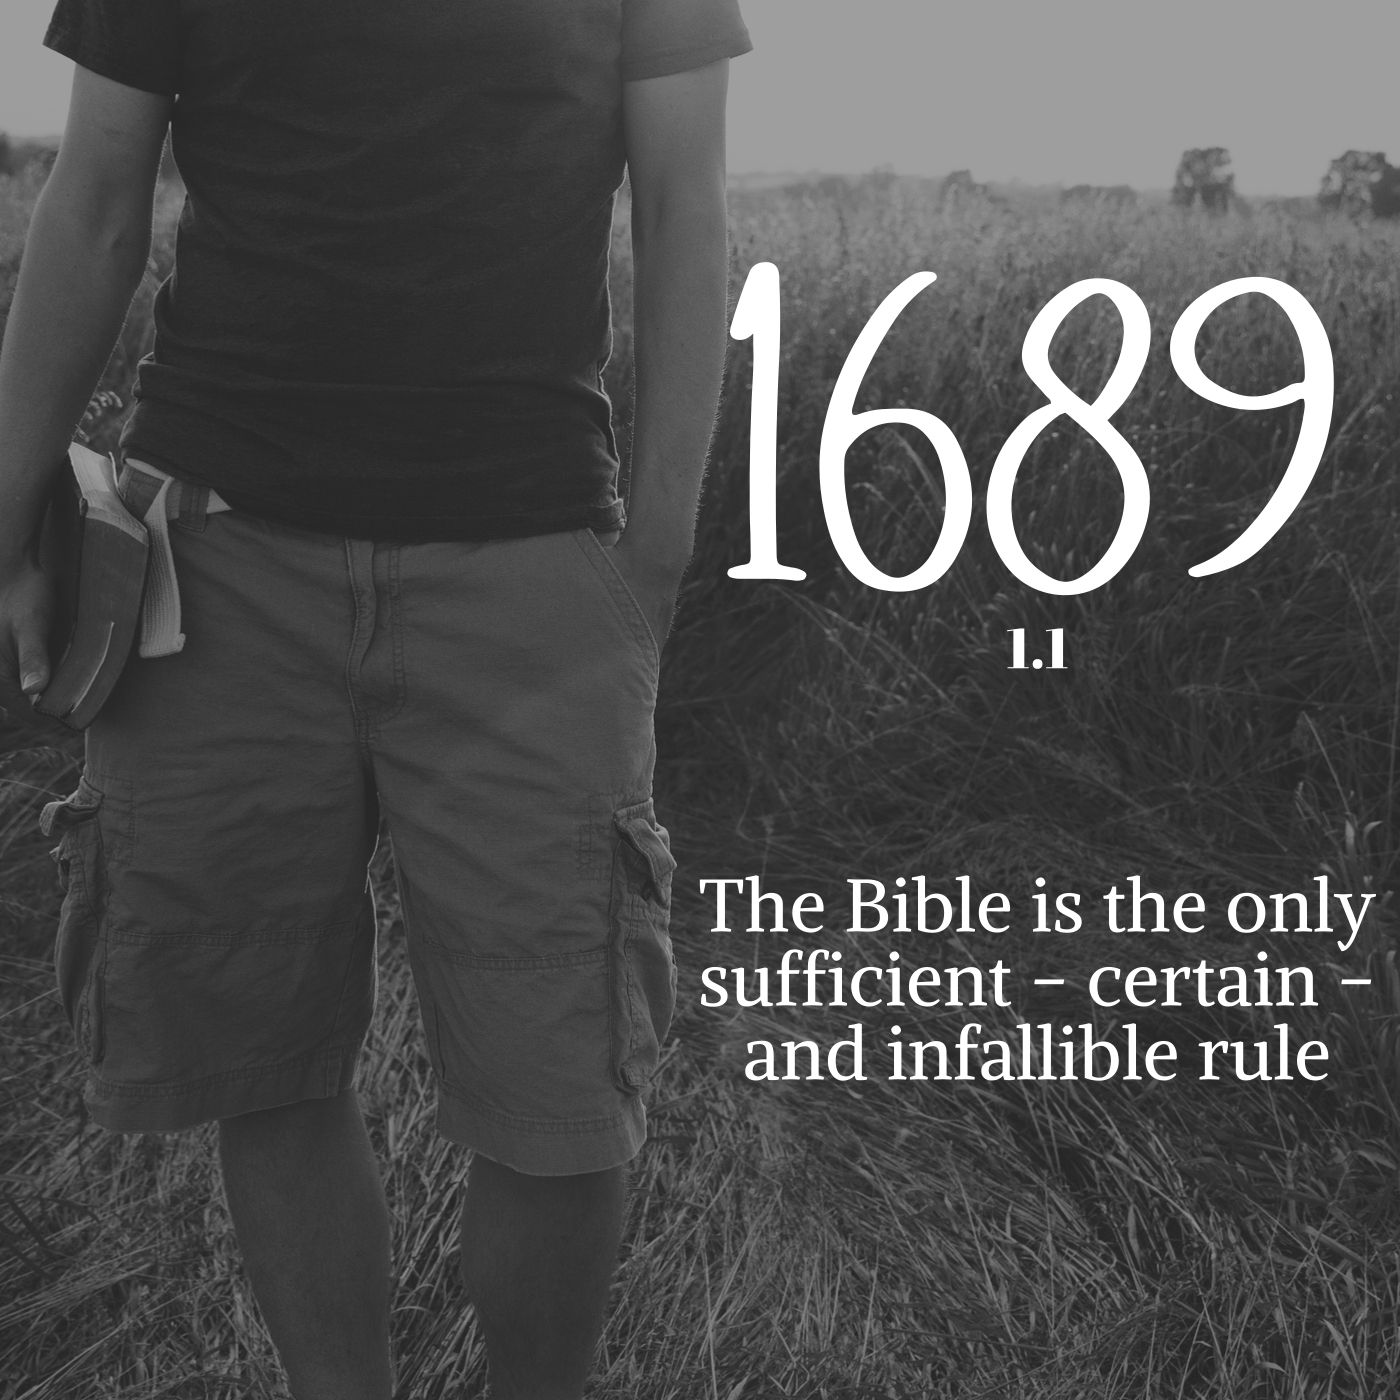 #28: 1689 1.1 The Bible is the only sufficient, certain, and infallible rule